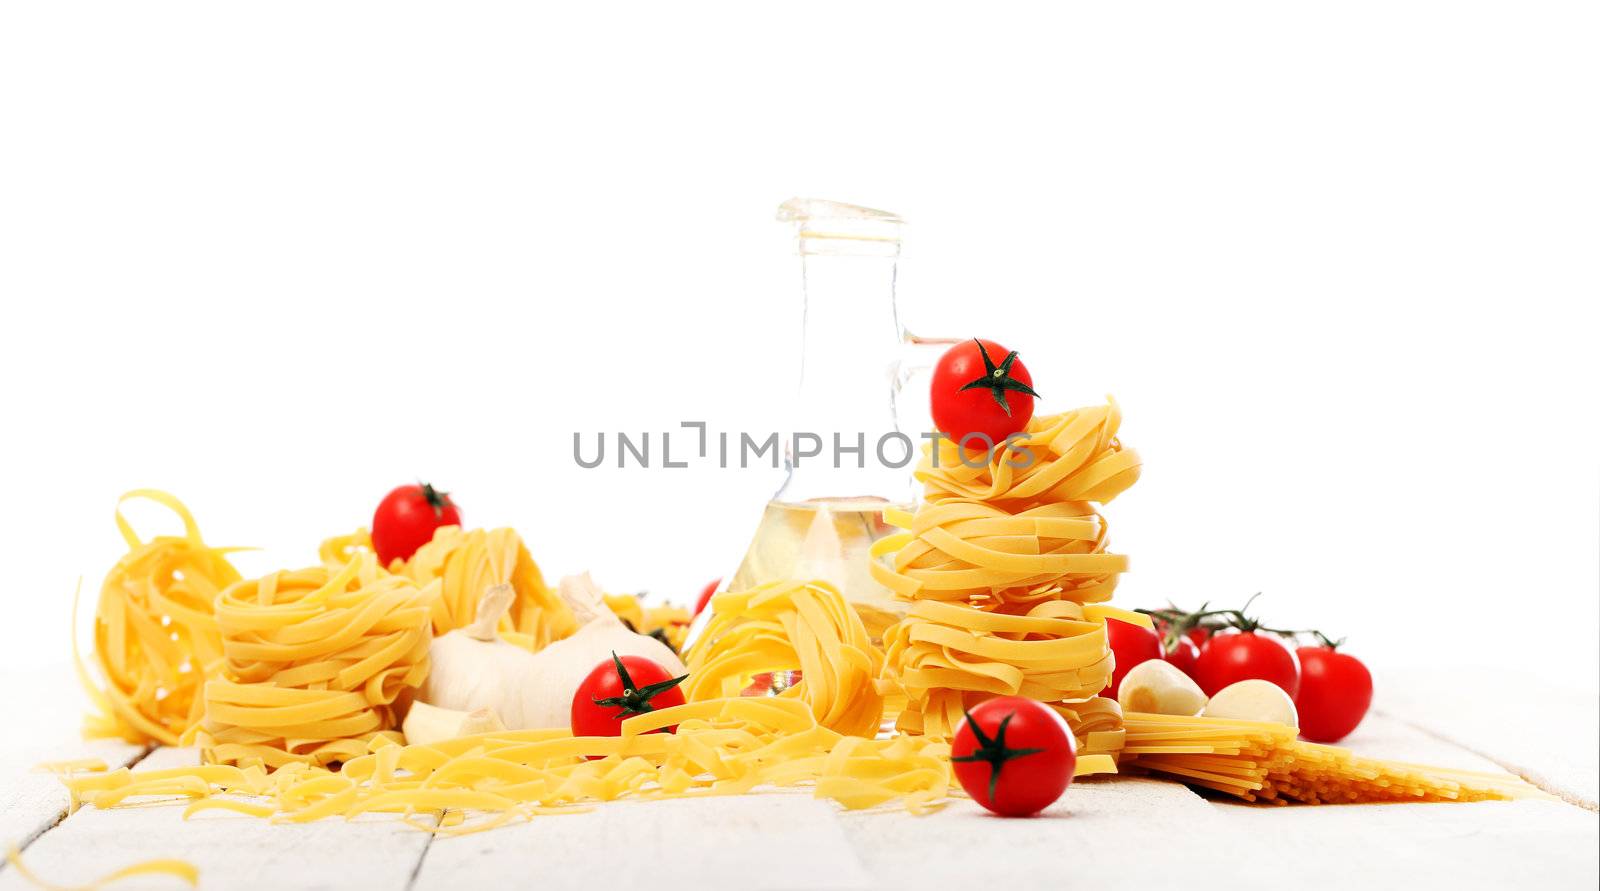 Pasta tomato and bottle of water on wooden surface by rufatjumali